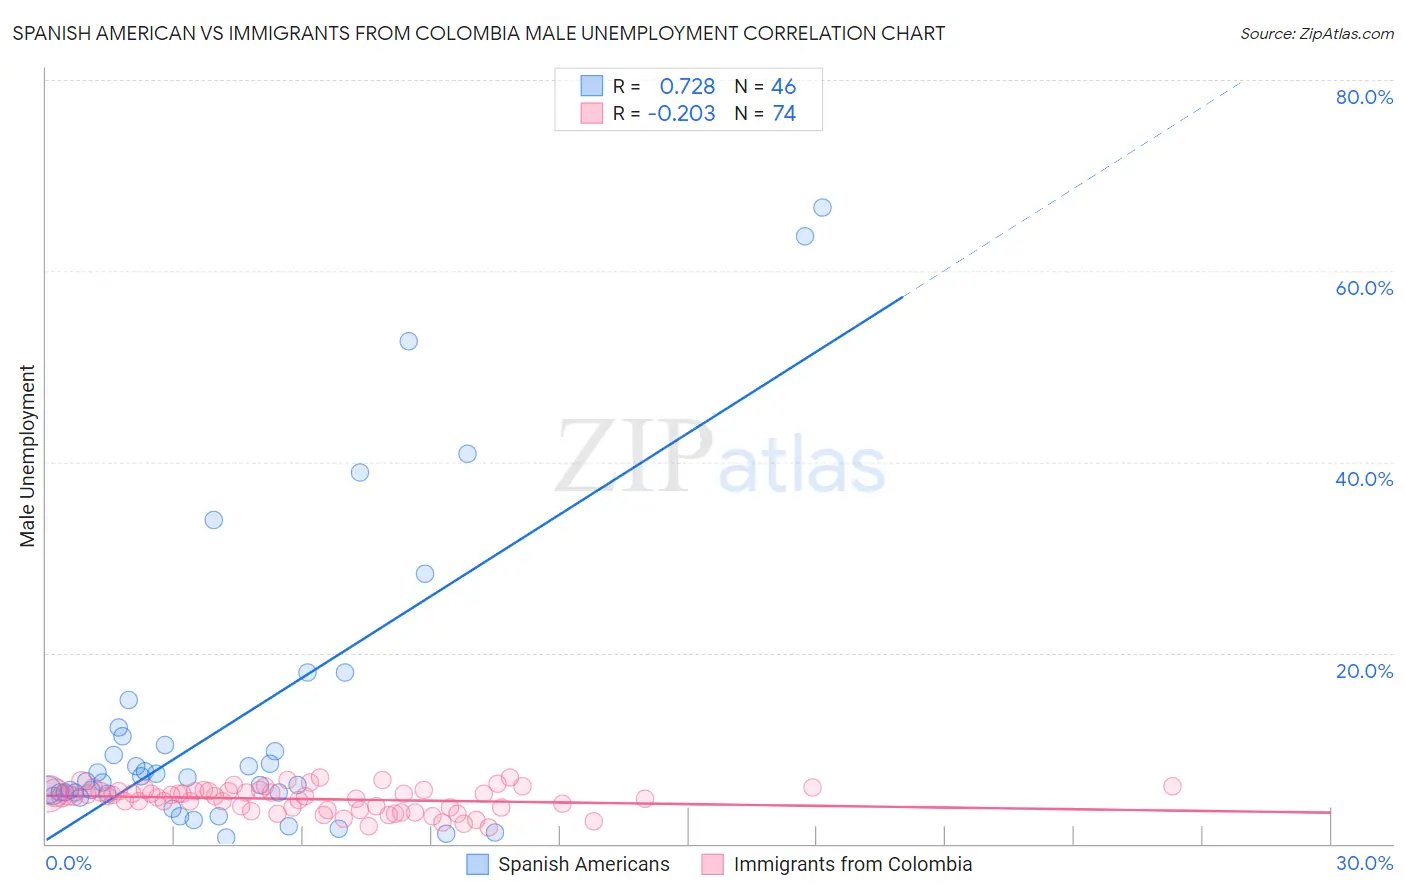 Spanish American vs Immigrants from Colombia Male Unemployment